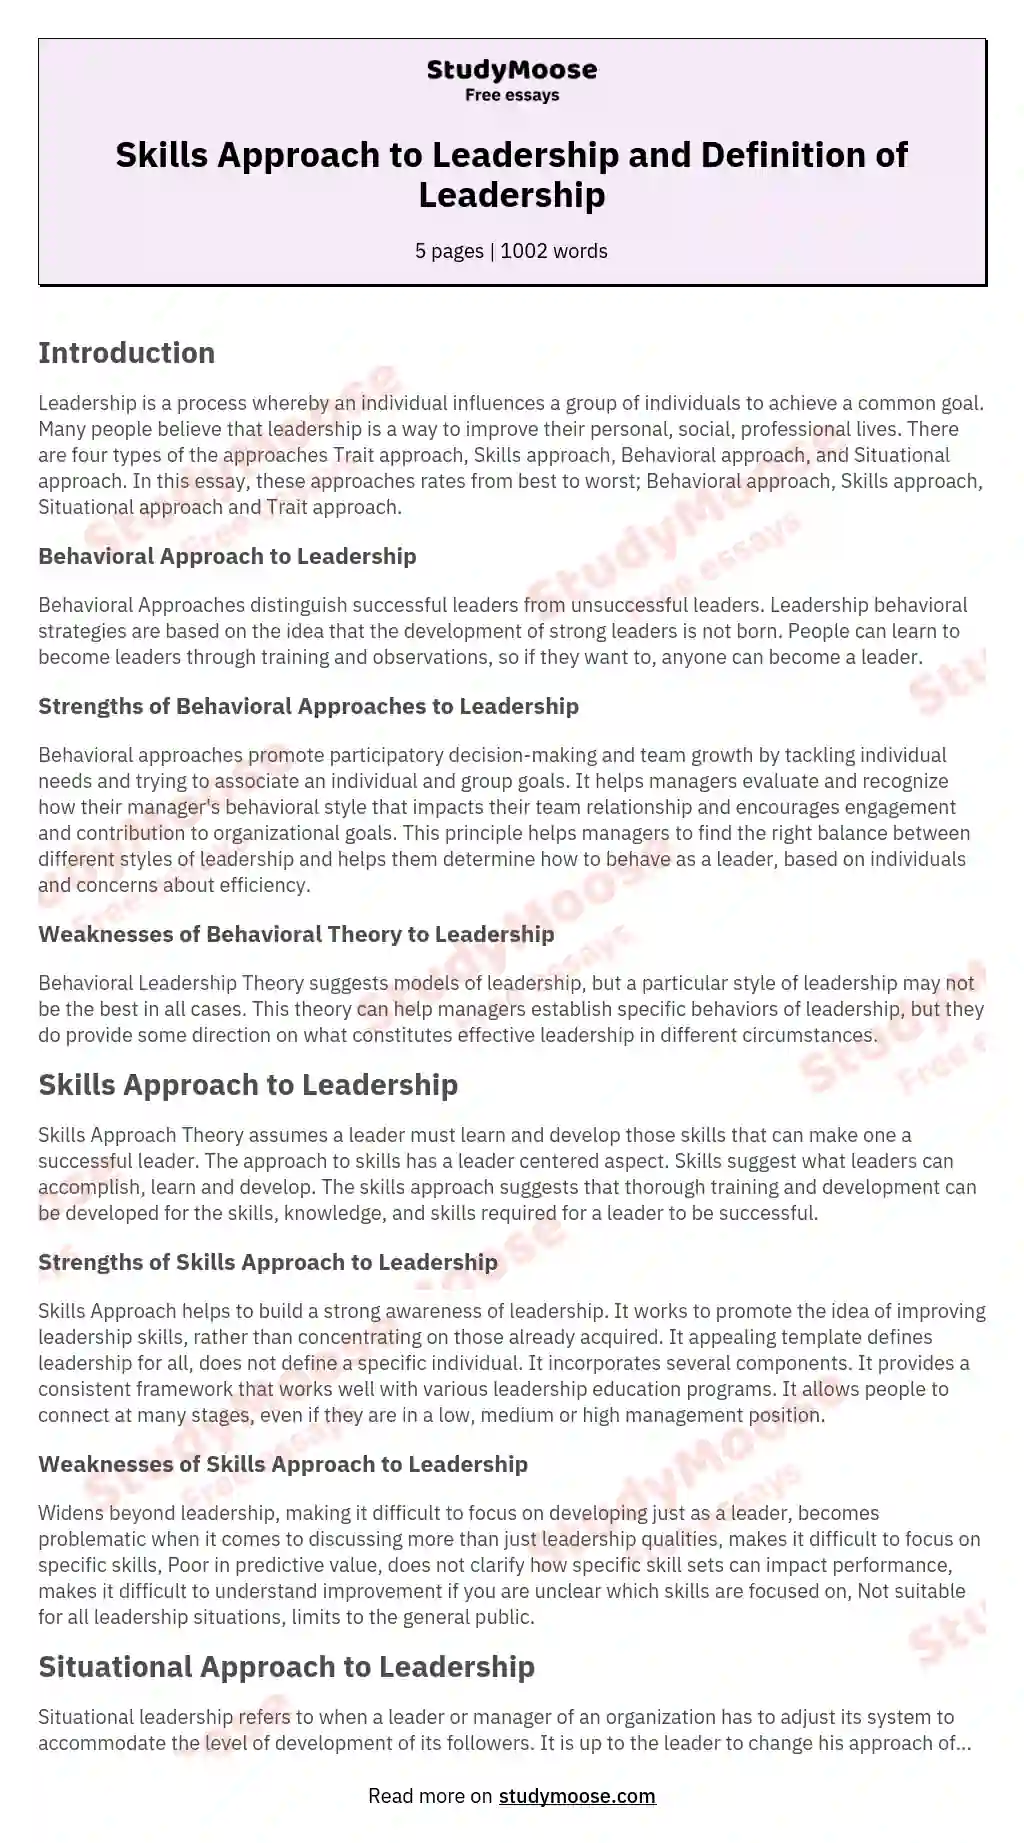 Skills Approach to Leadership and Definition of Leadership essay